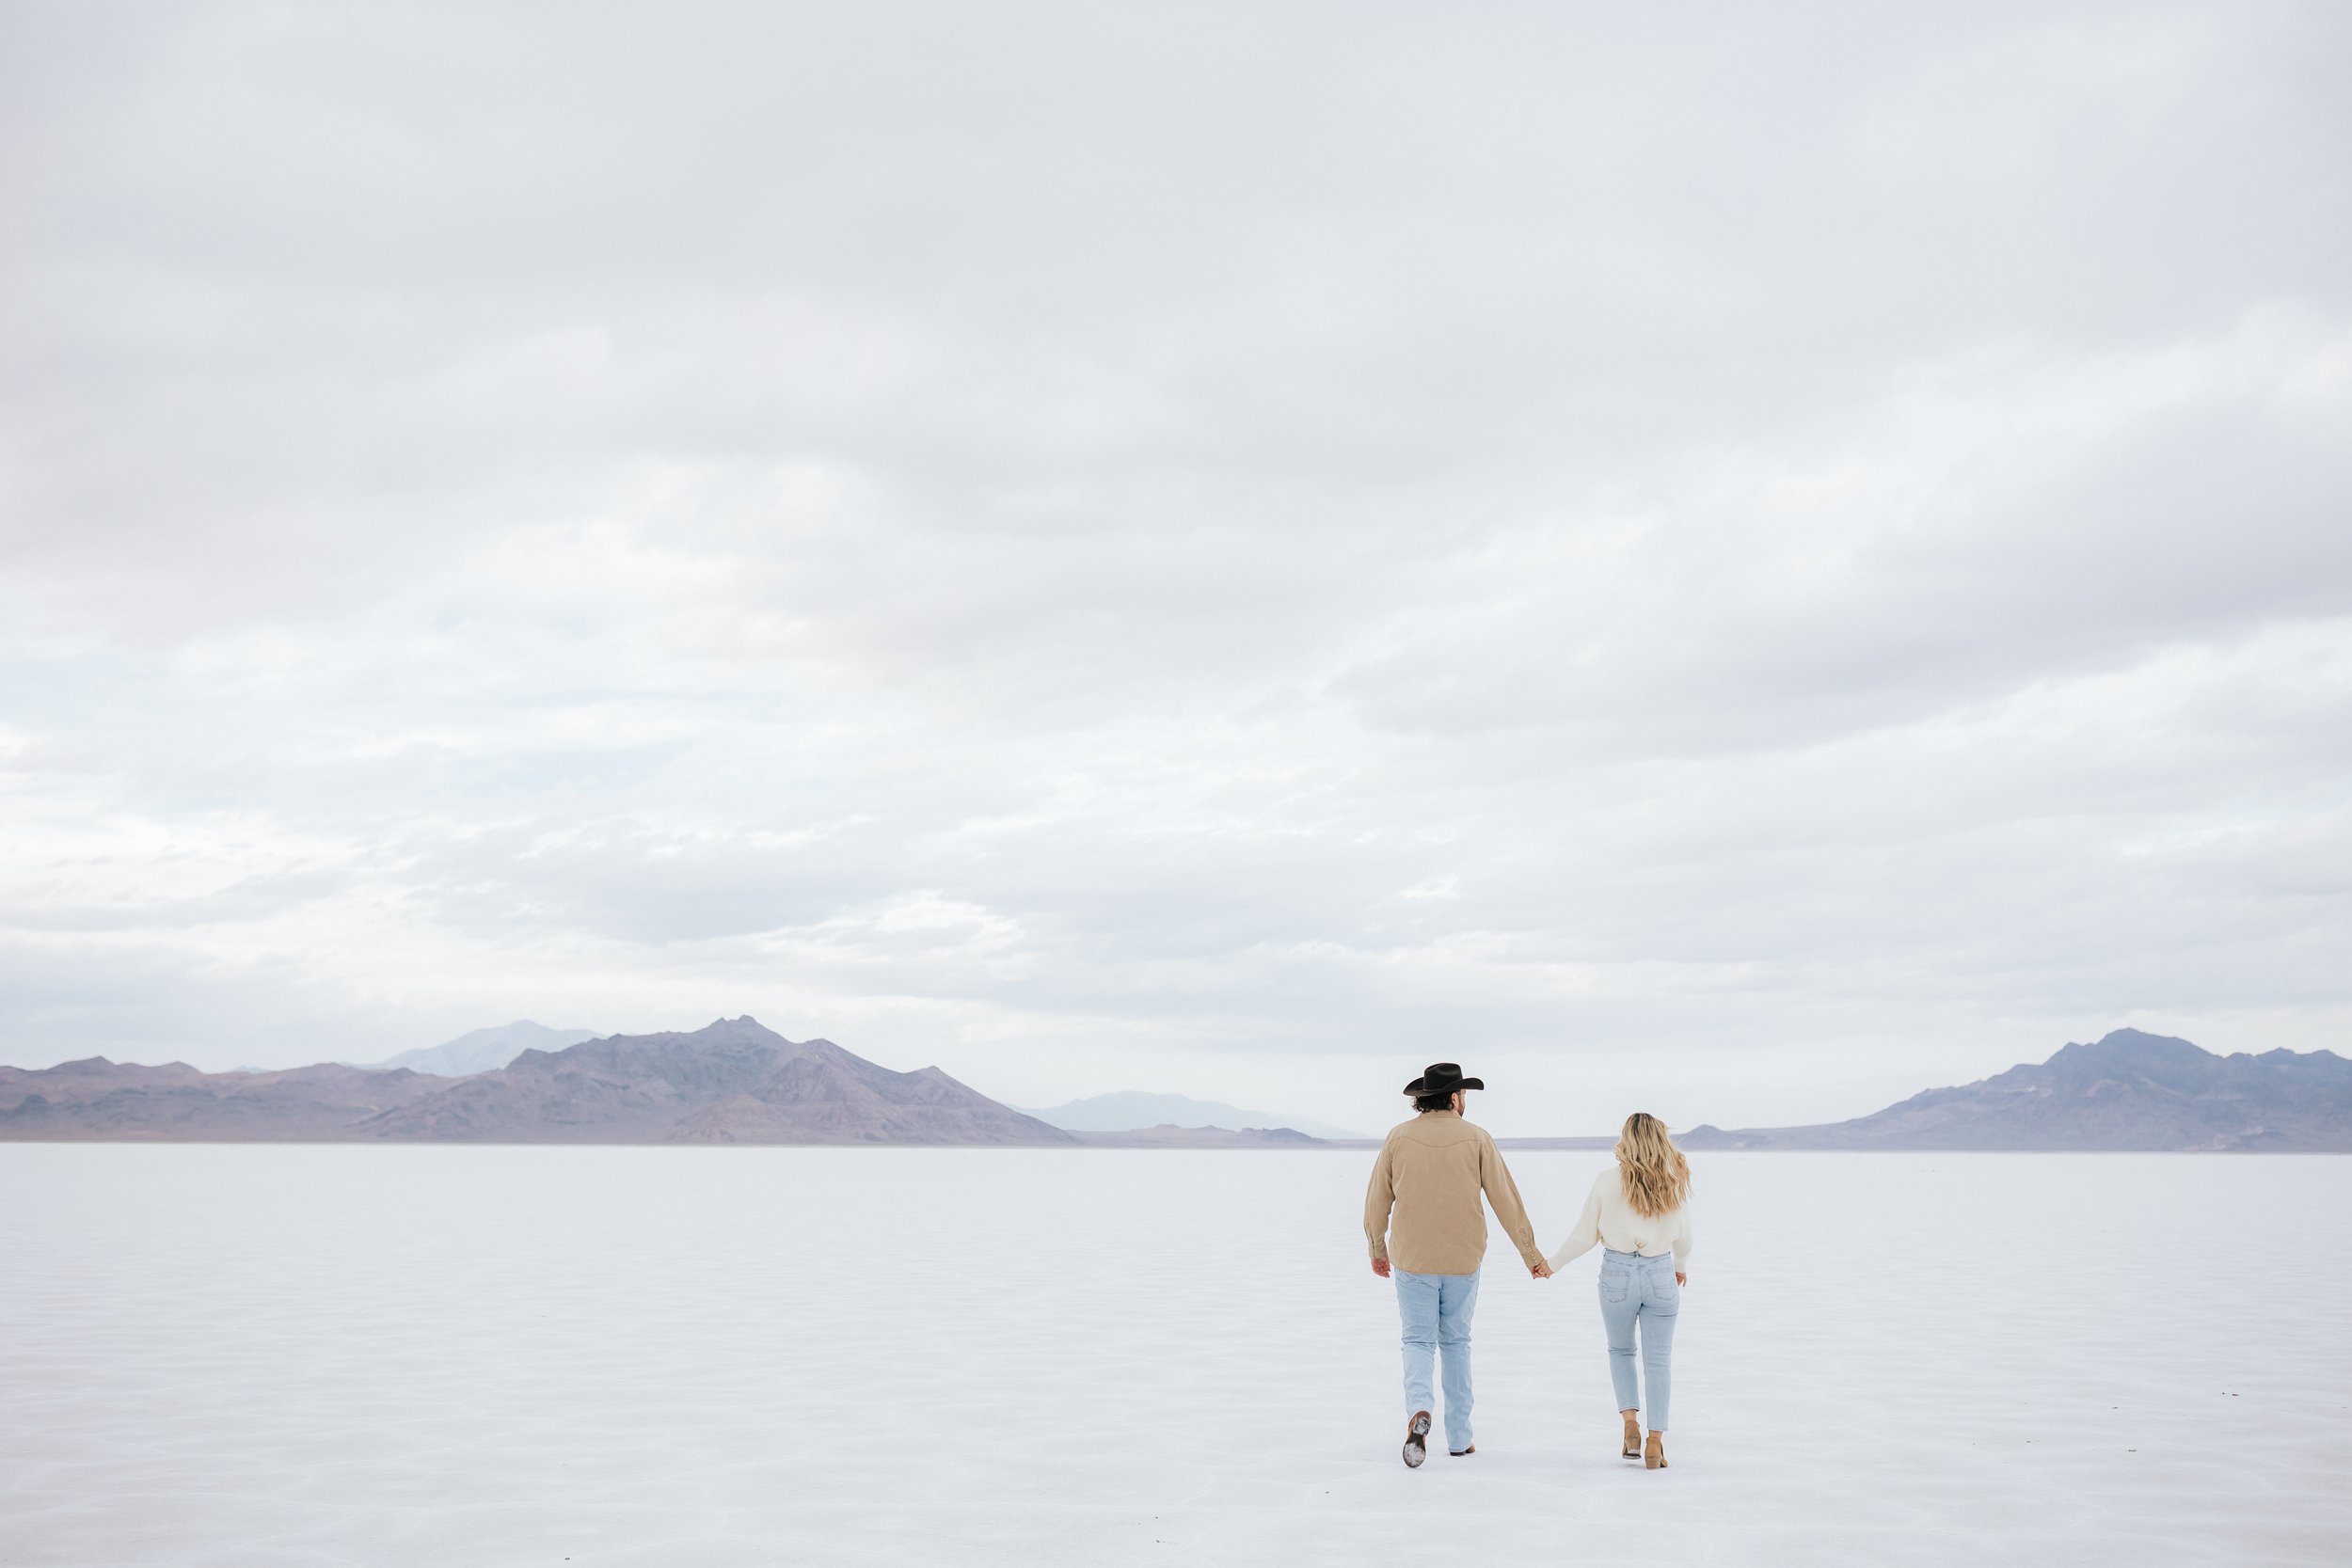  Photo of an engaged couple as they kiss and hug at the Bonneville Salt Flats near Wendover, Nevada and Salt Lake City, Utah. Cowboy and his girl walk together holding hands. The Salt Flats are white and the sky is overcast. The mountains show behind